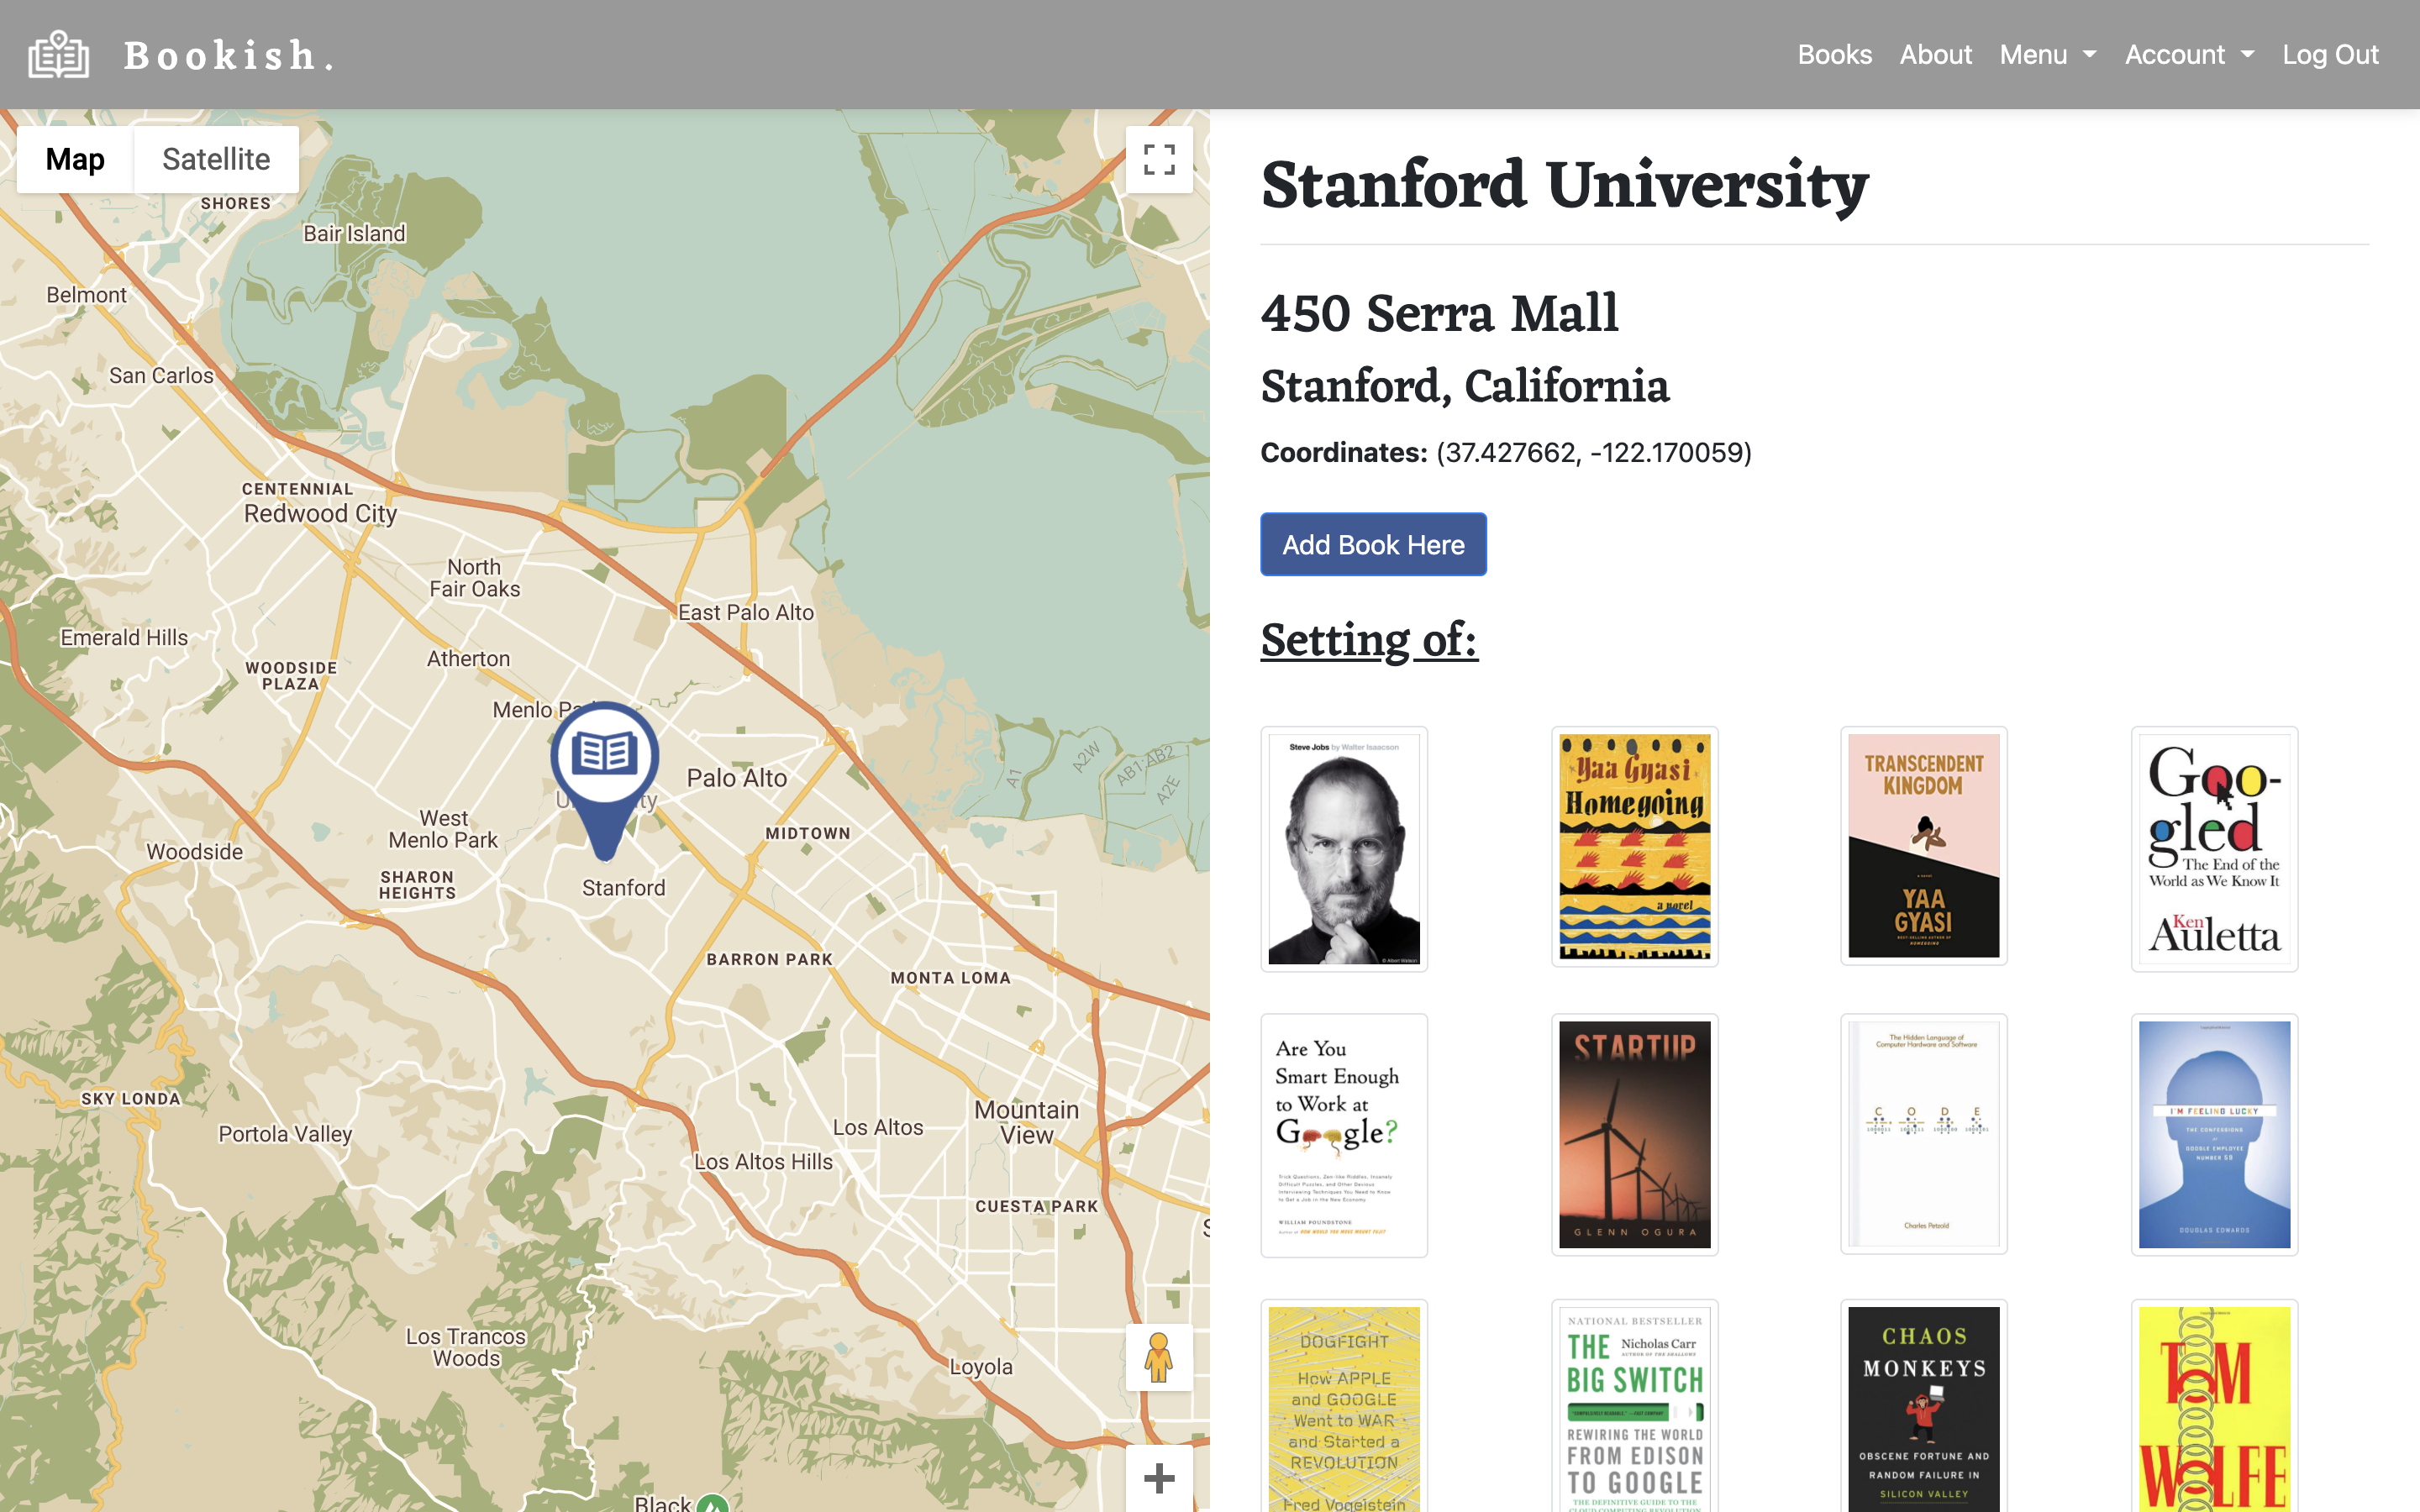 Location Details page for Stanford University